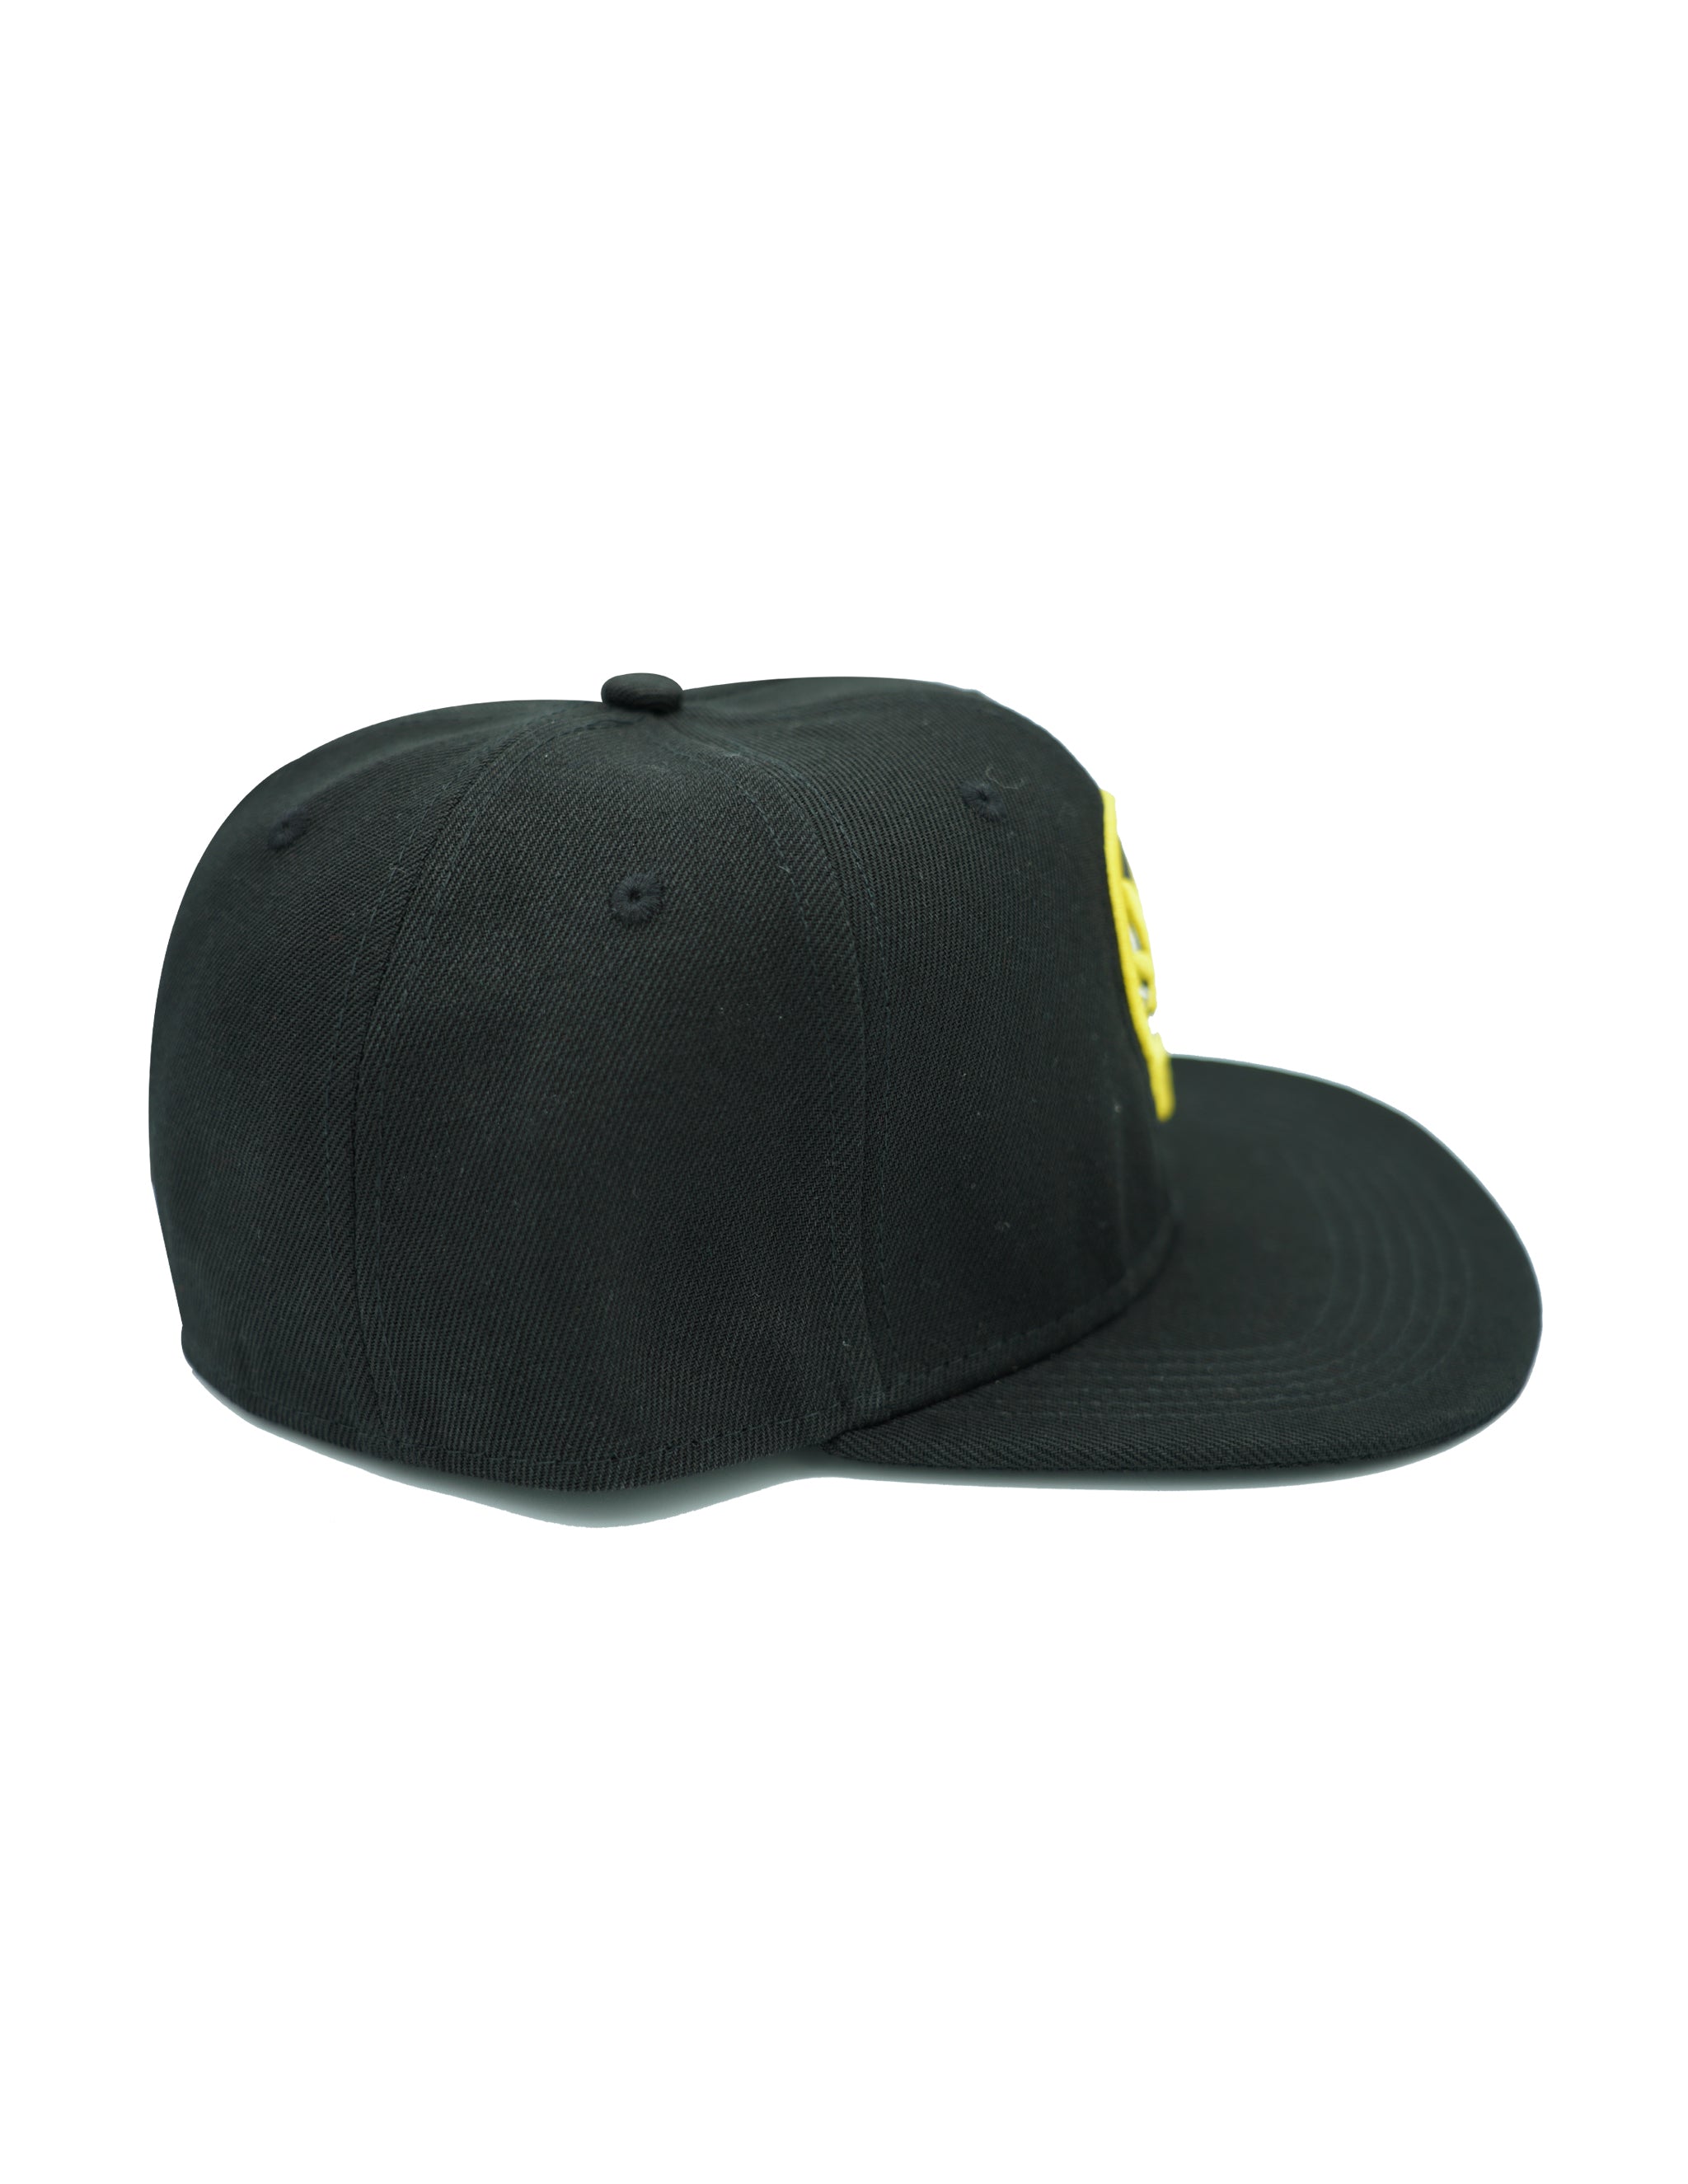 Cali Honey Bee Logo Fitted Hat